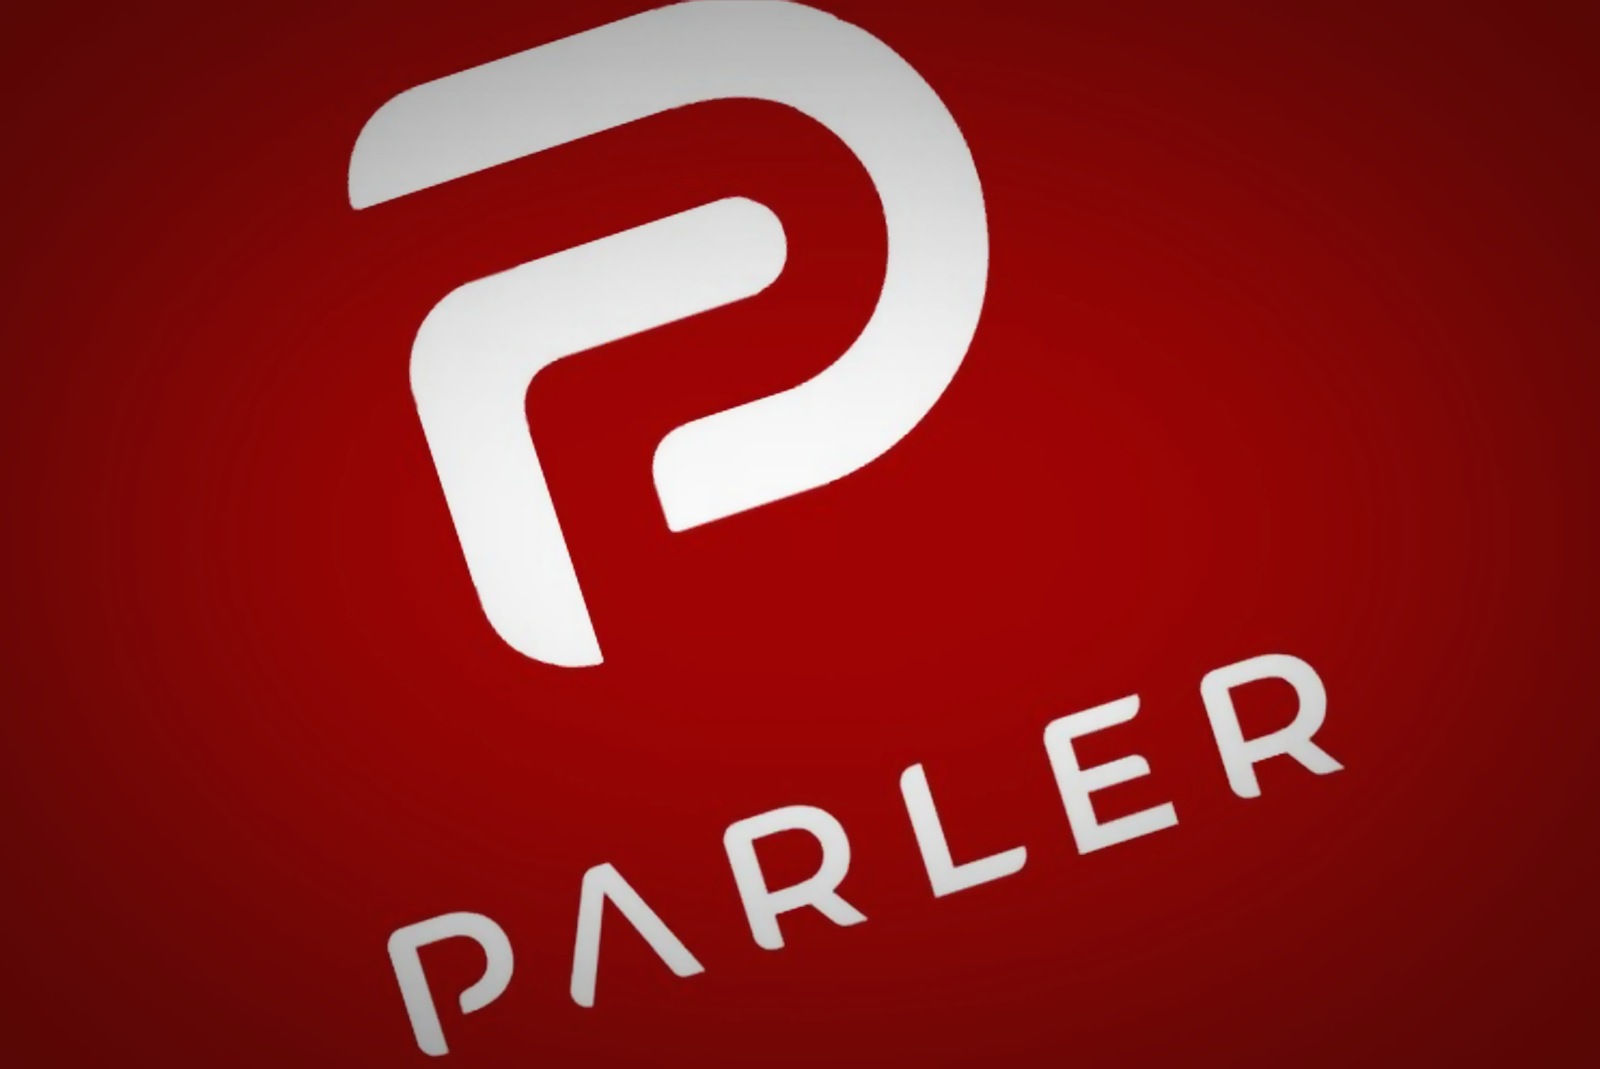 Google removes Parler app from Play Store photo 1